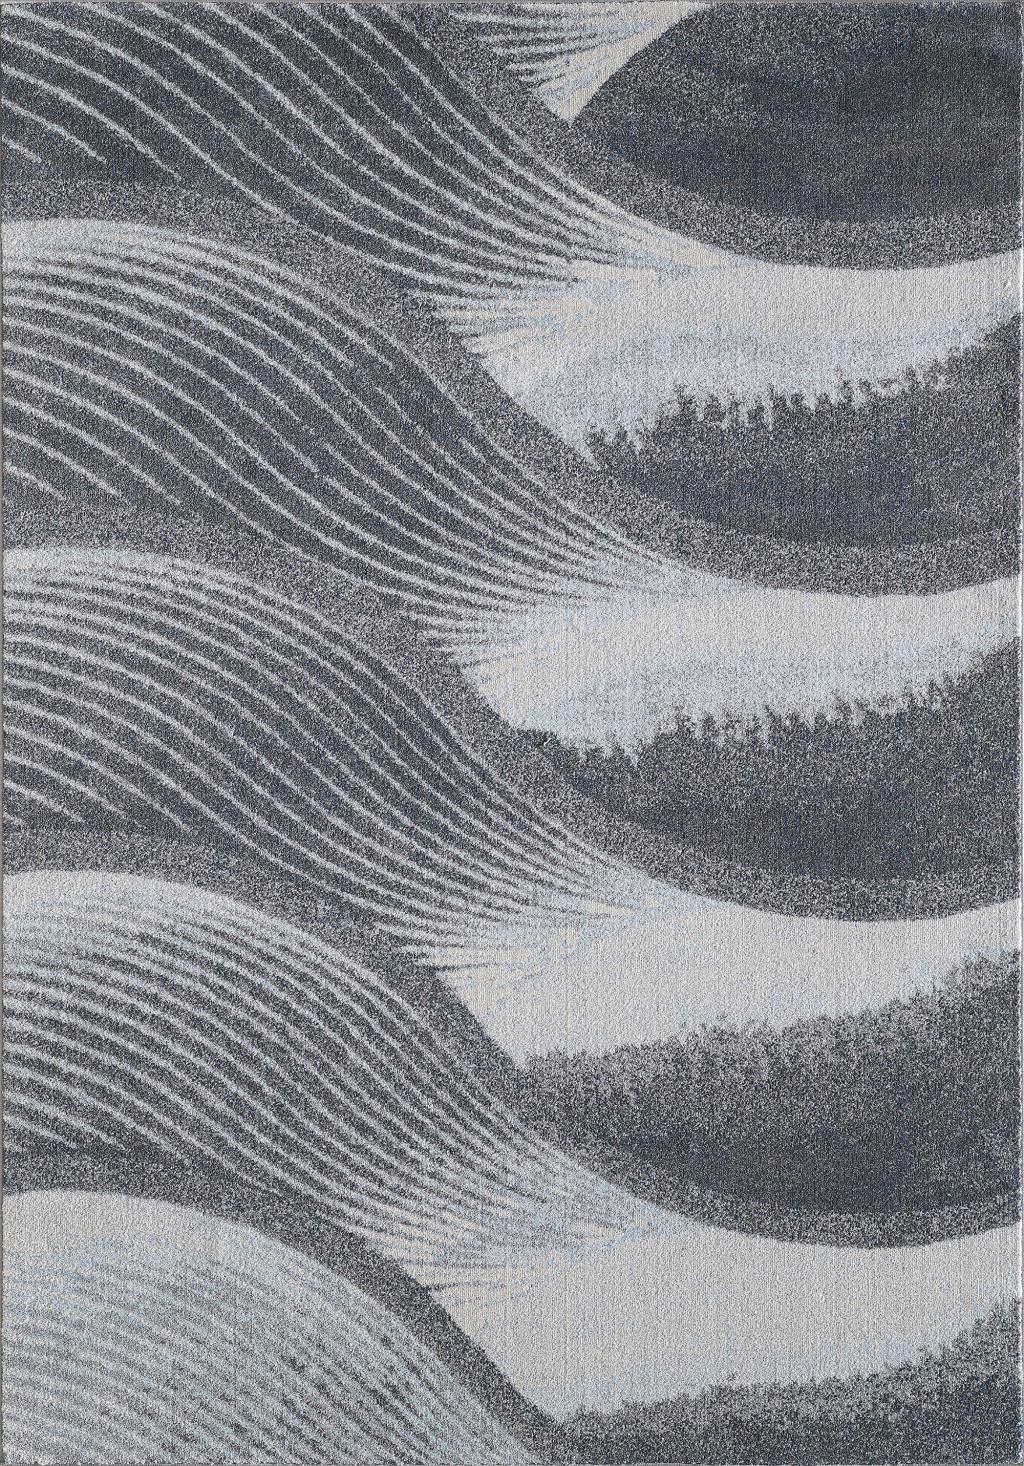 10’ x 13’ Gray Blue Abstract Waves Modern Area Rug